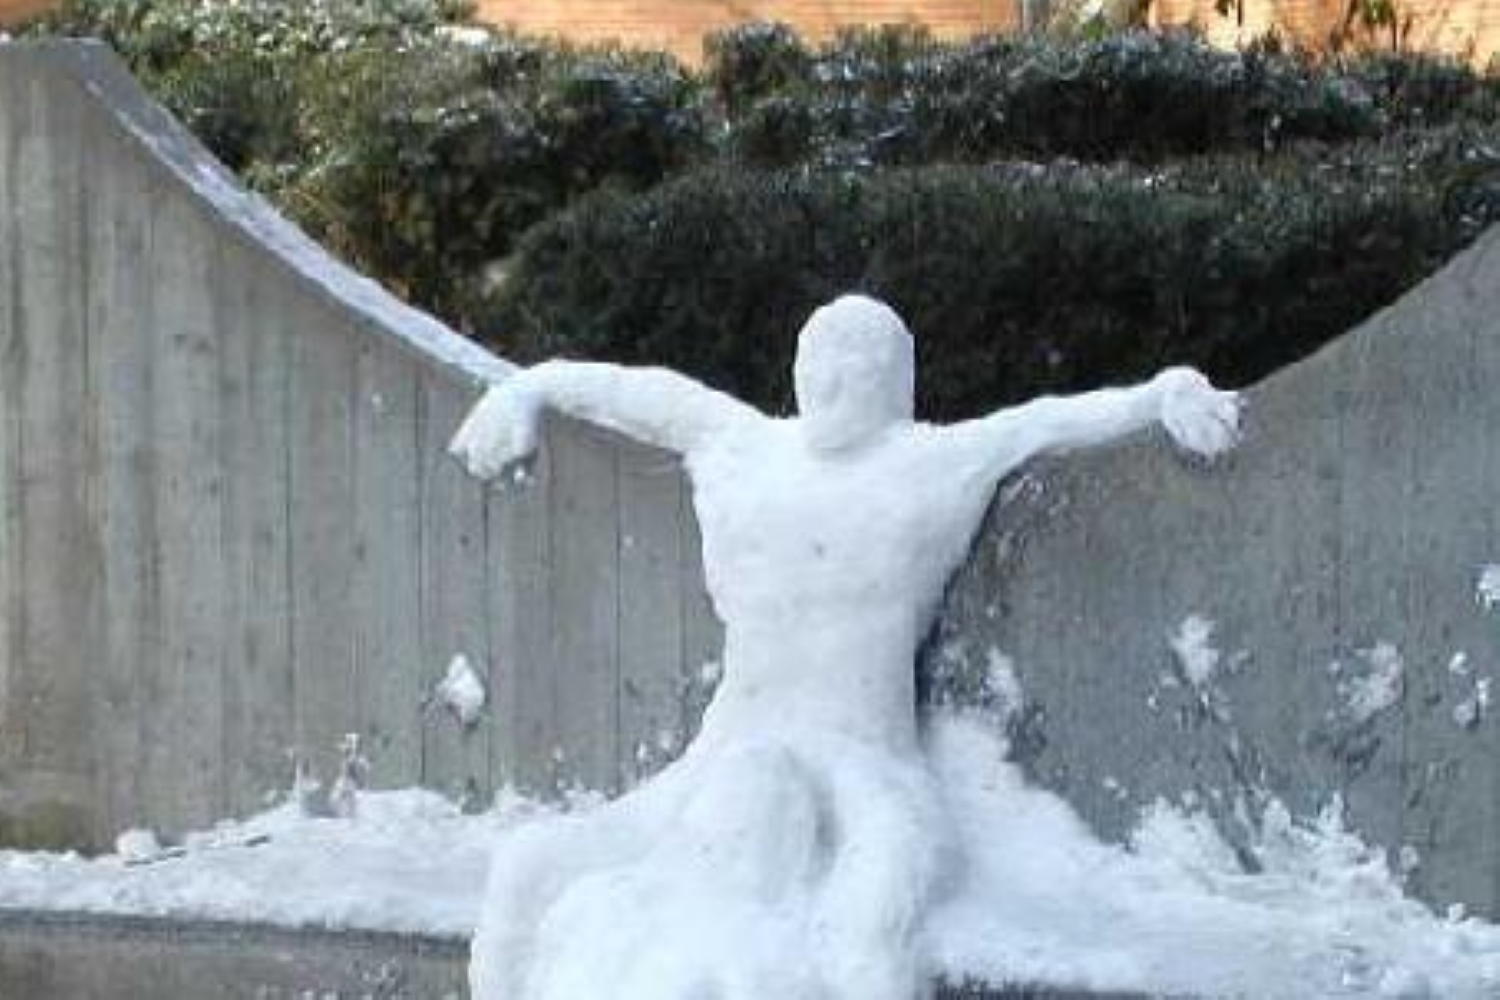 ICYMI: There was a social media uproar over sexy (but fake) Winnipeg snow  sculptures - Curiocity